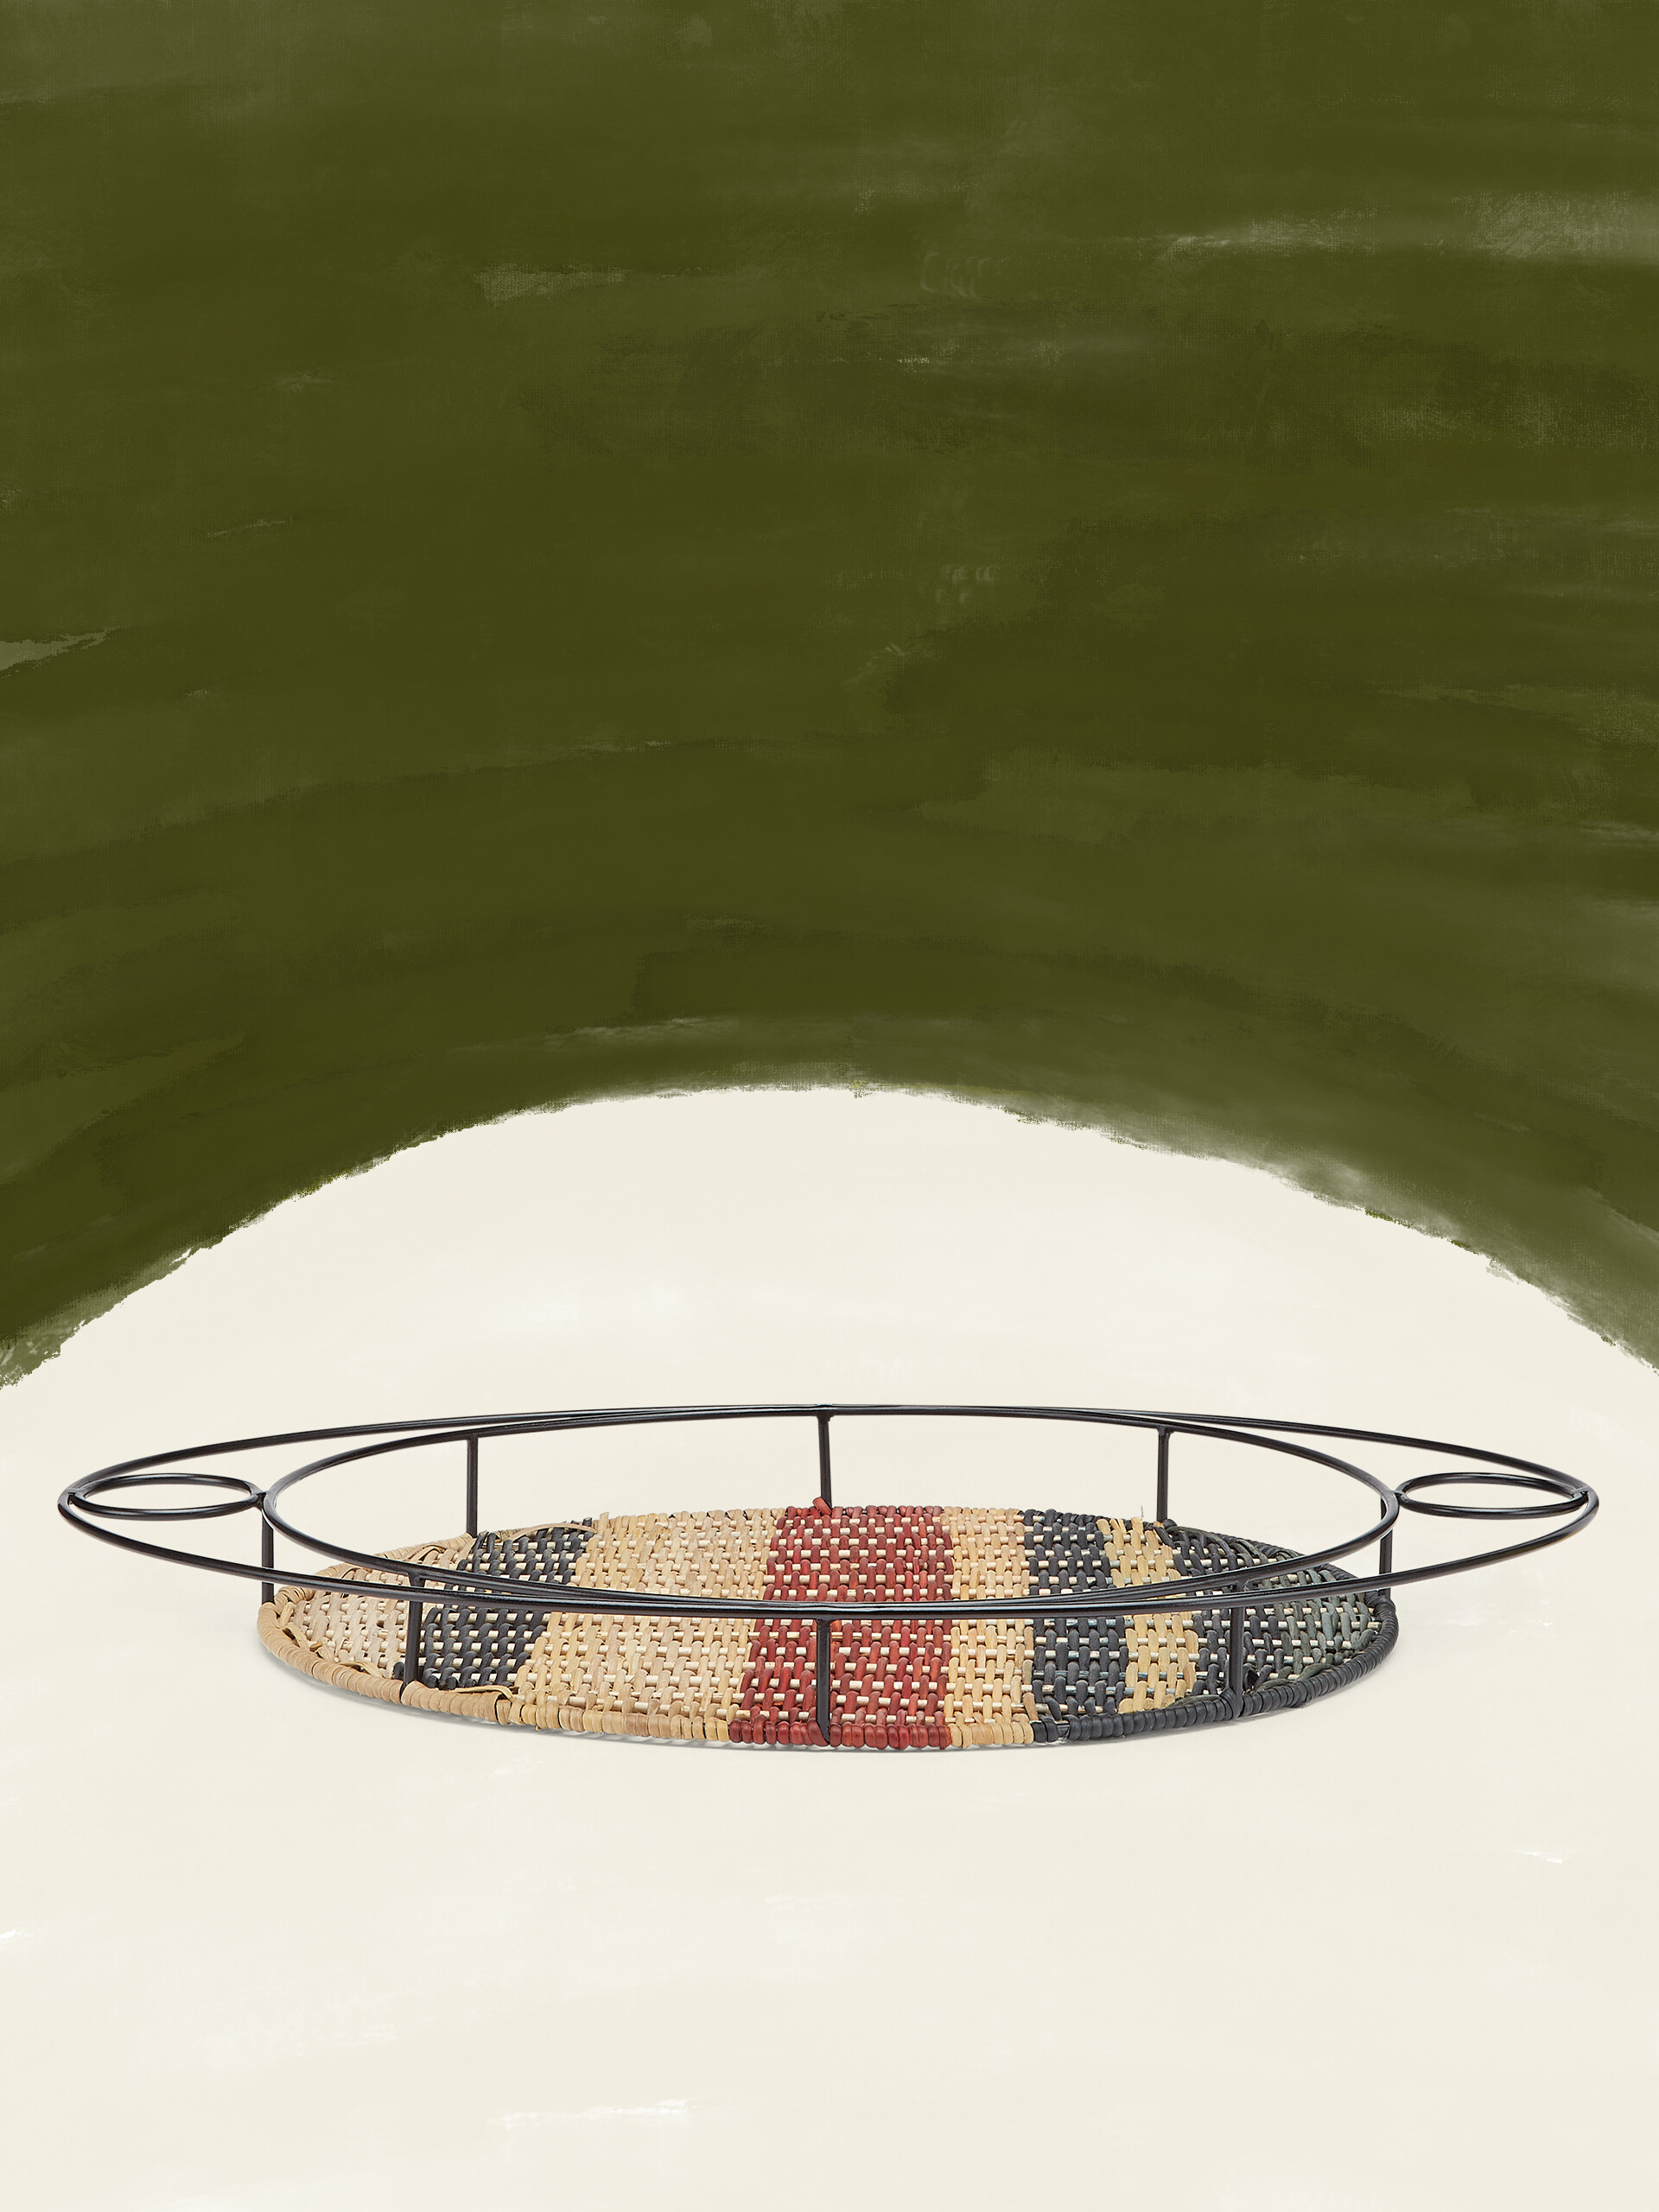 MARNI MARKET oval tray in iron and black, beige and burgundy wicker - Accessories - Image 1